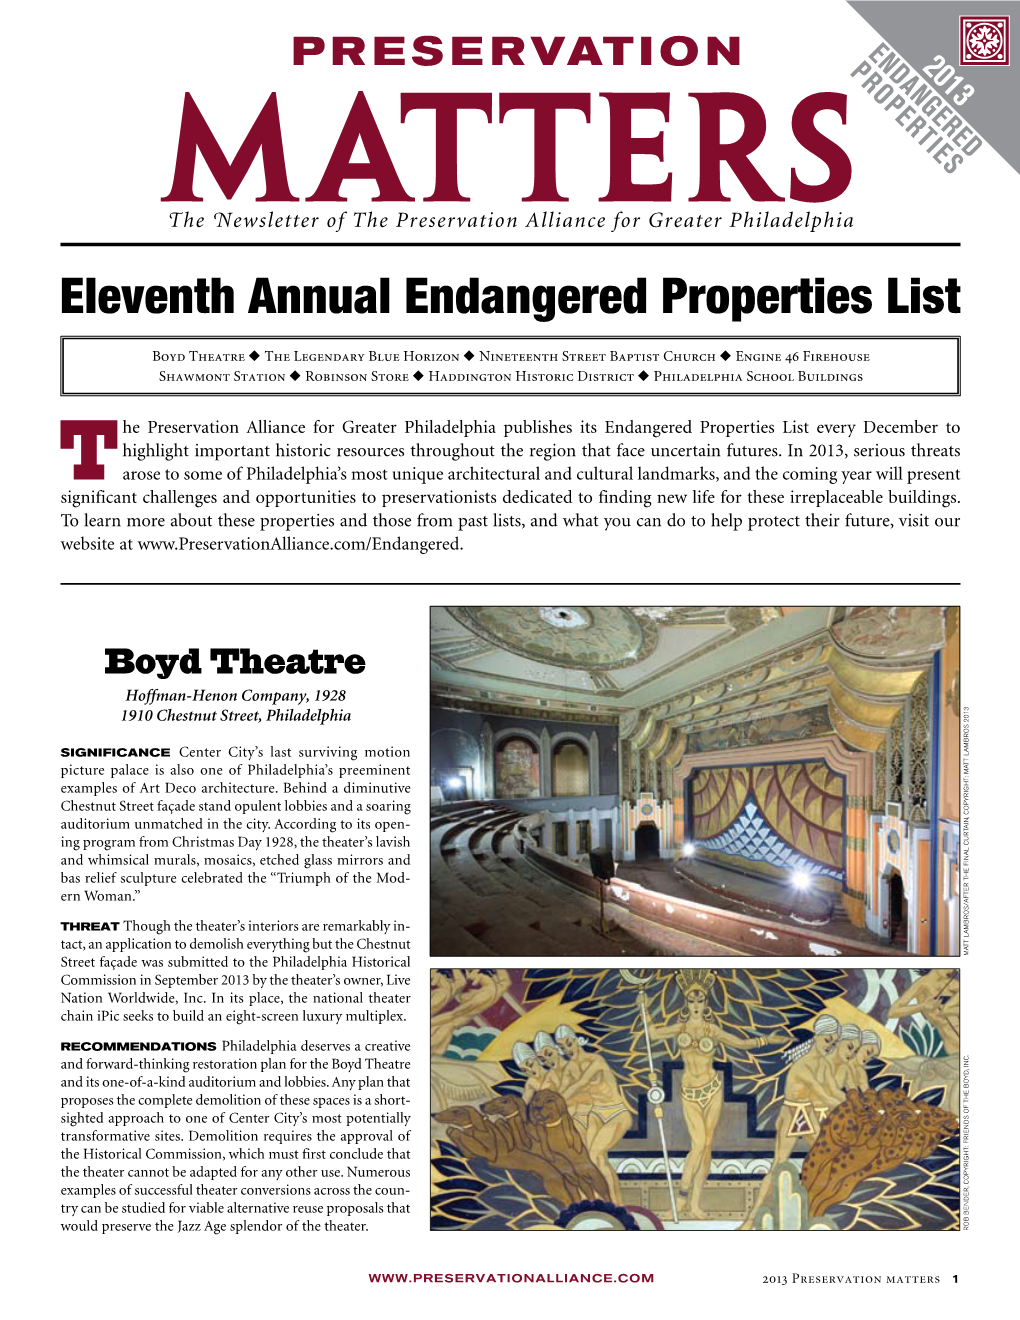 Eleventh Annual Endangered Properties List